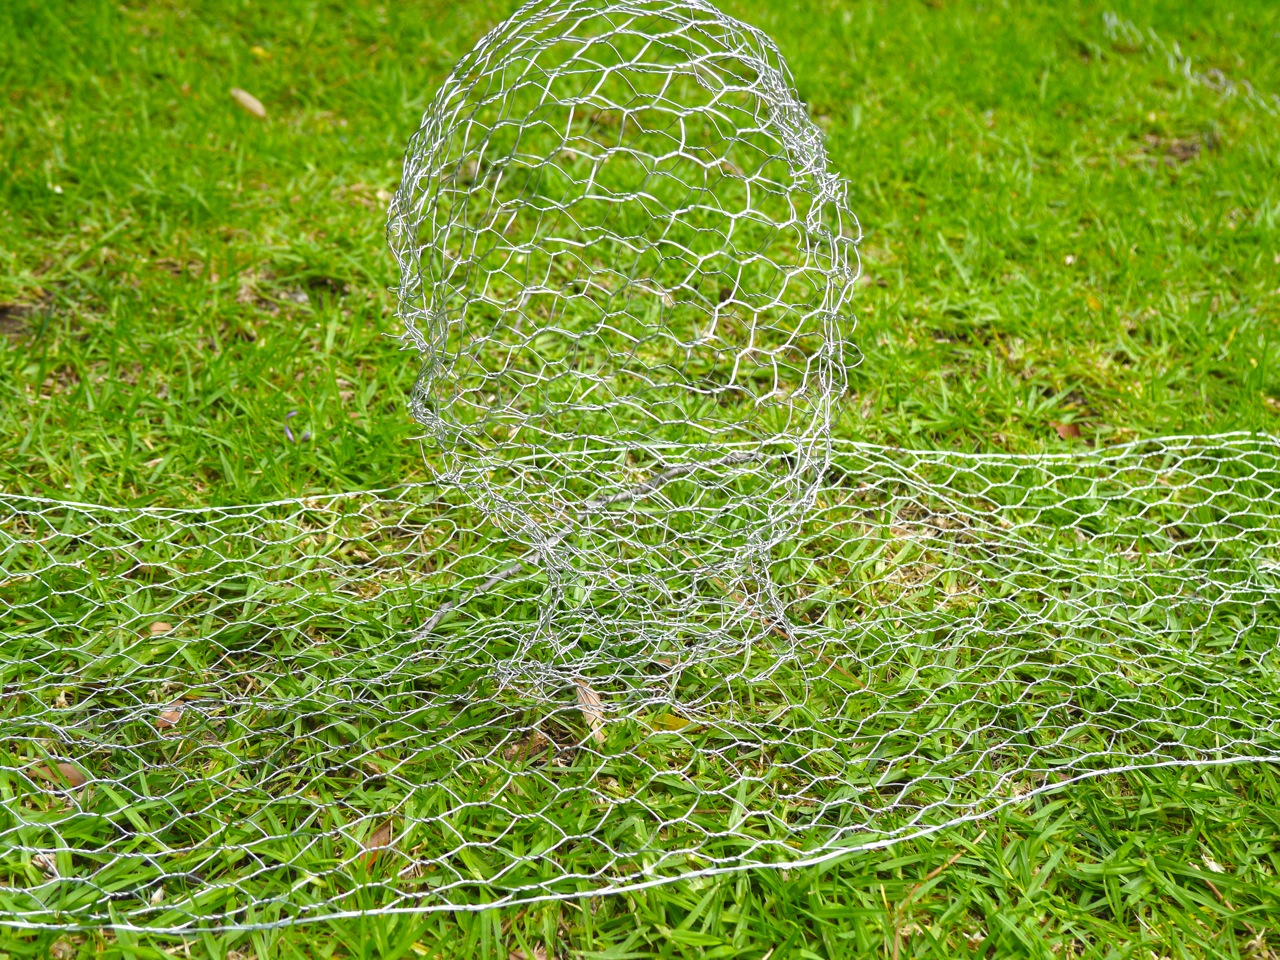 How to make Chicken Wire Ghosts – Home and Garden